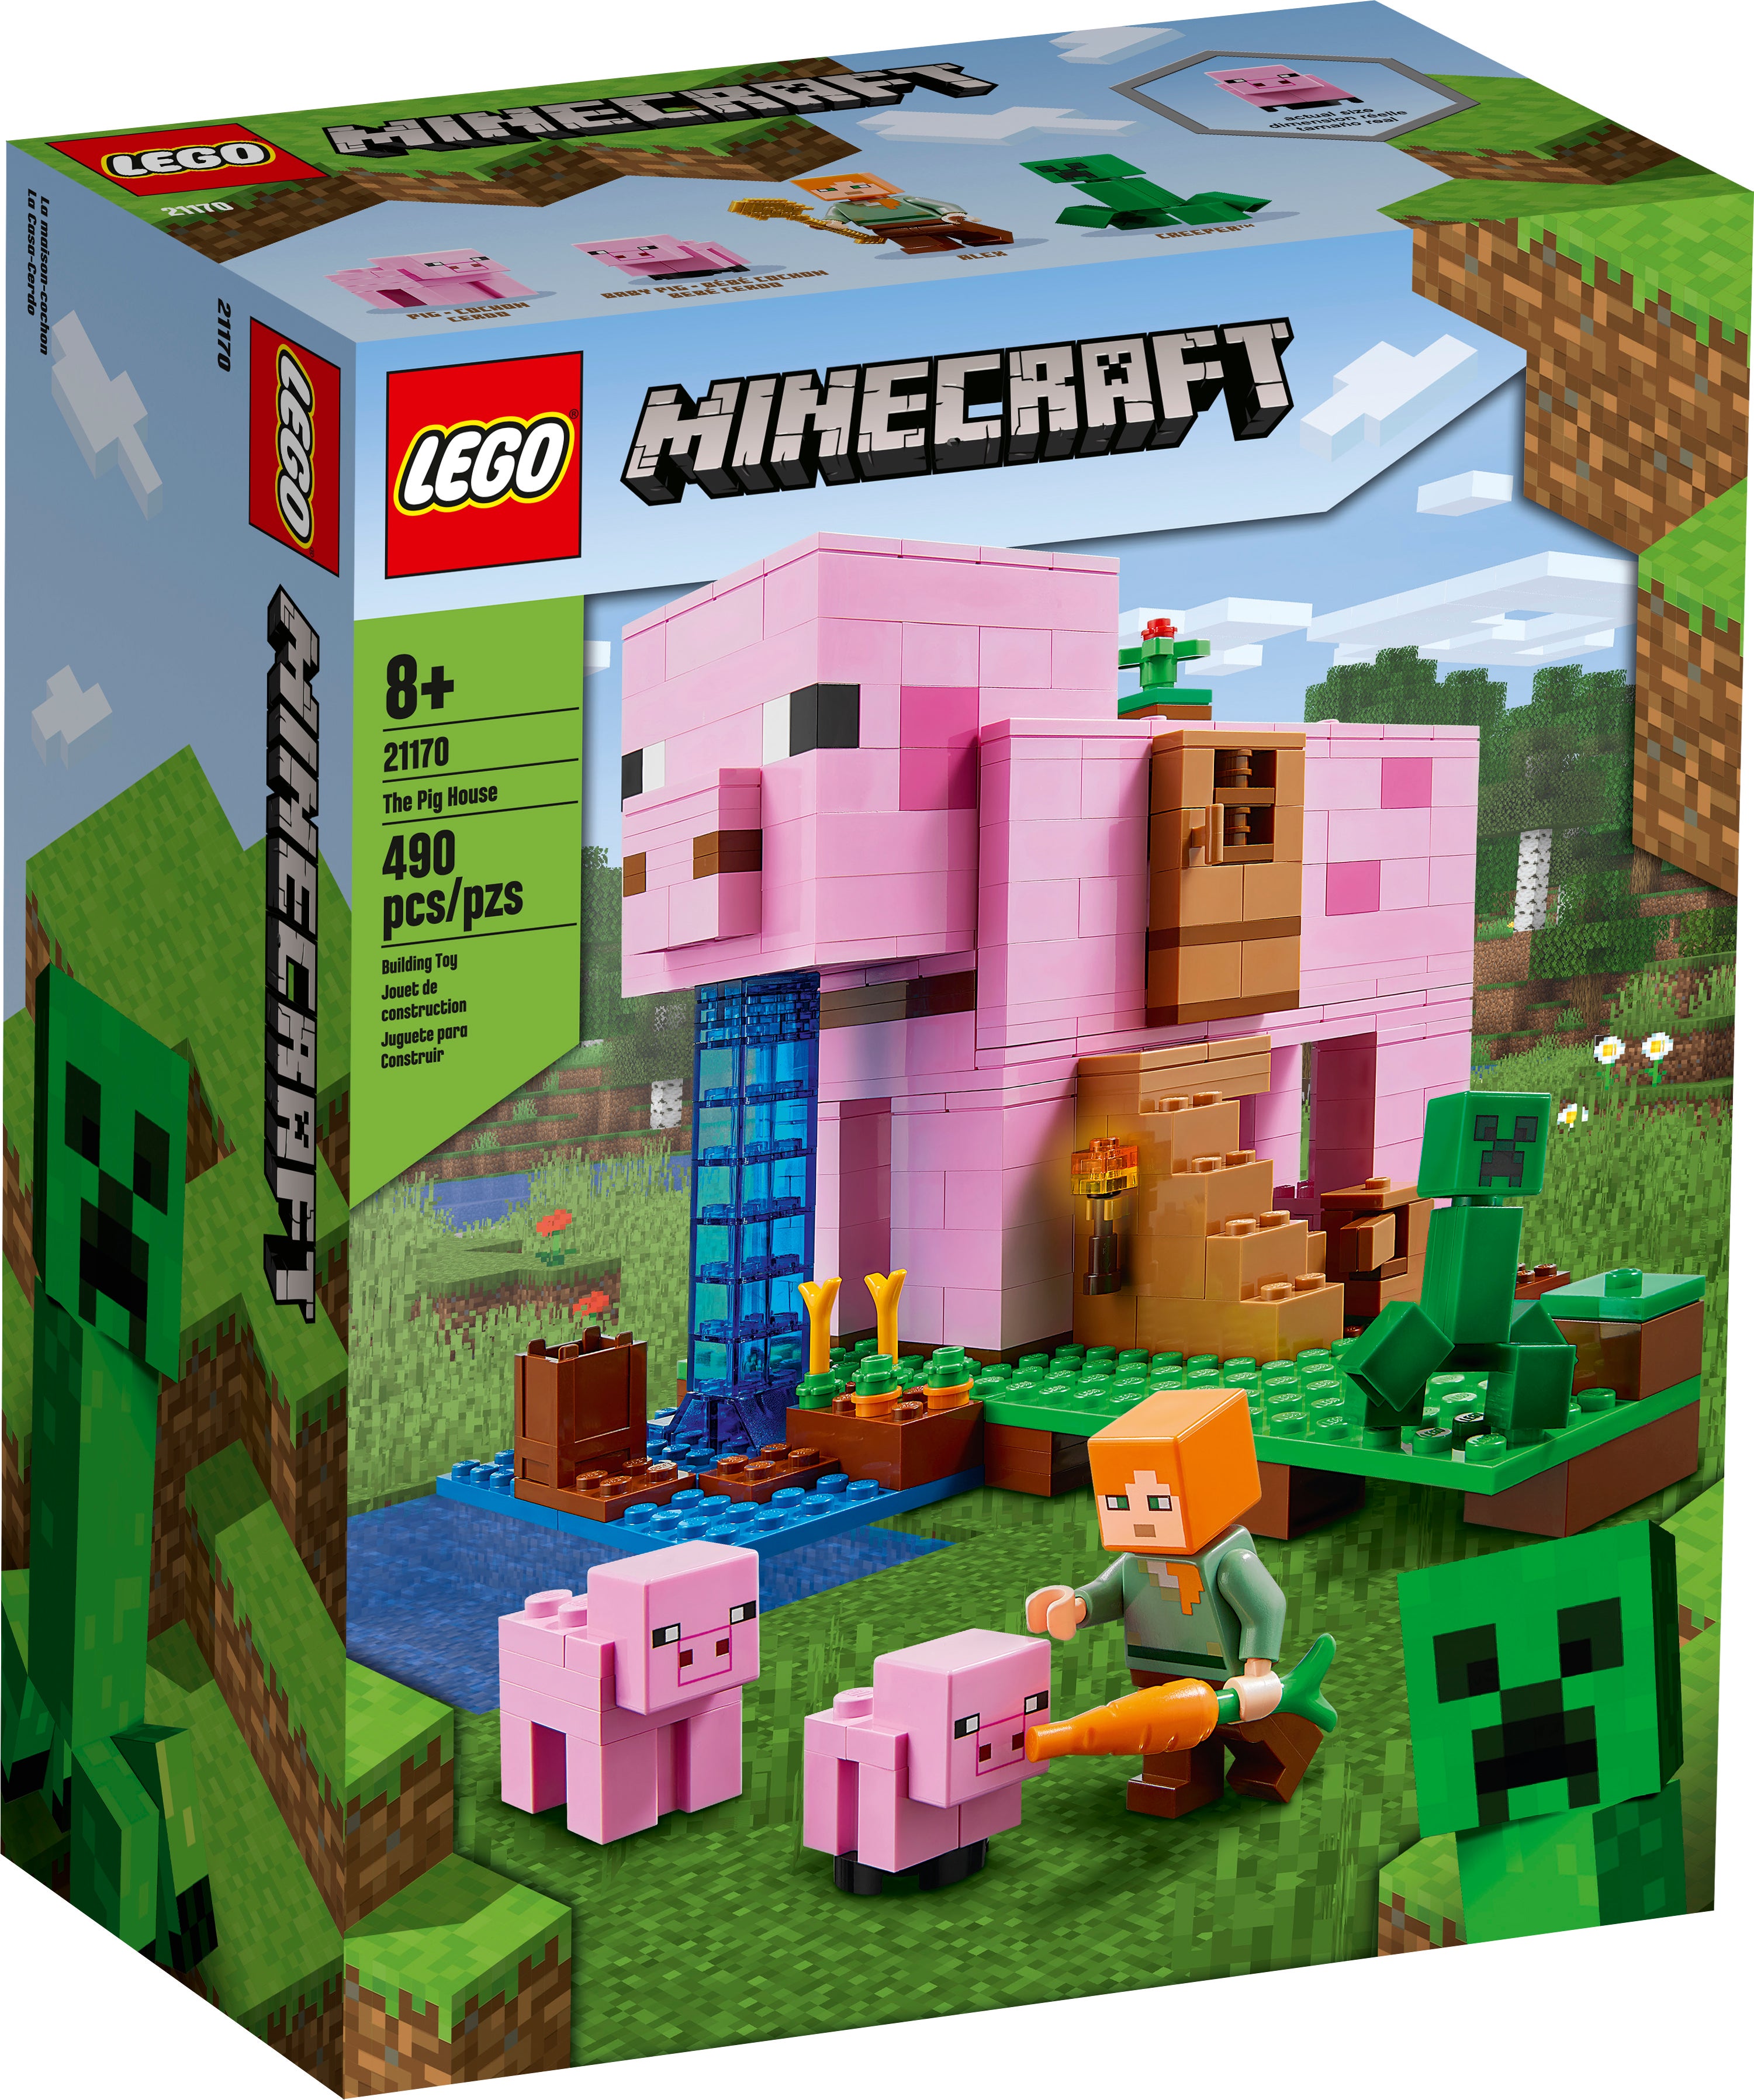 LEGO Minecraft The Pig House 21170 Building Kit for sale online 490 Pieces 